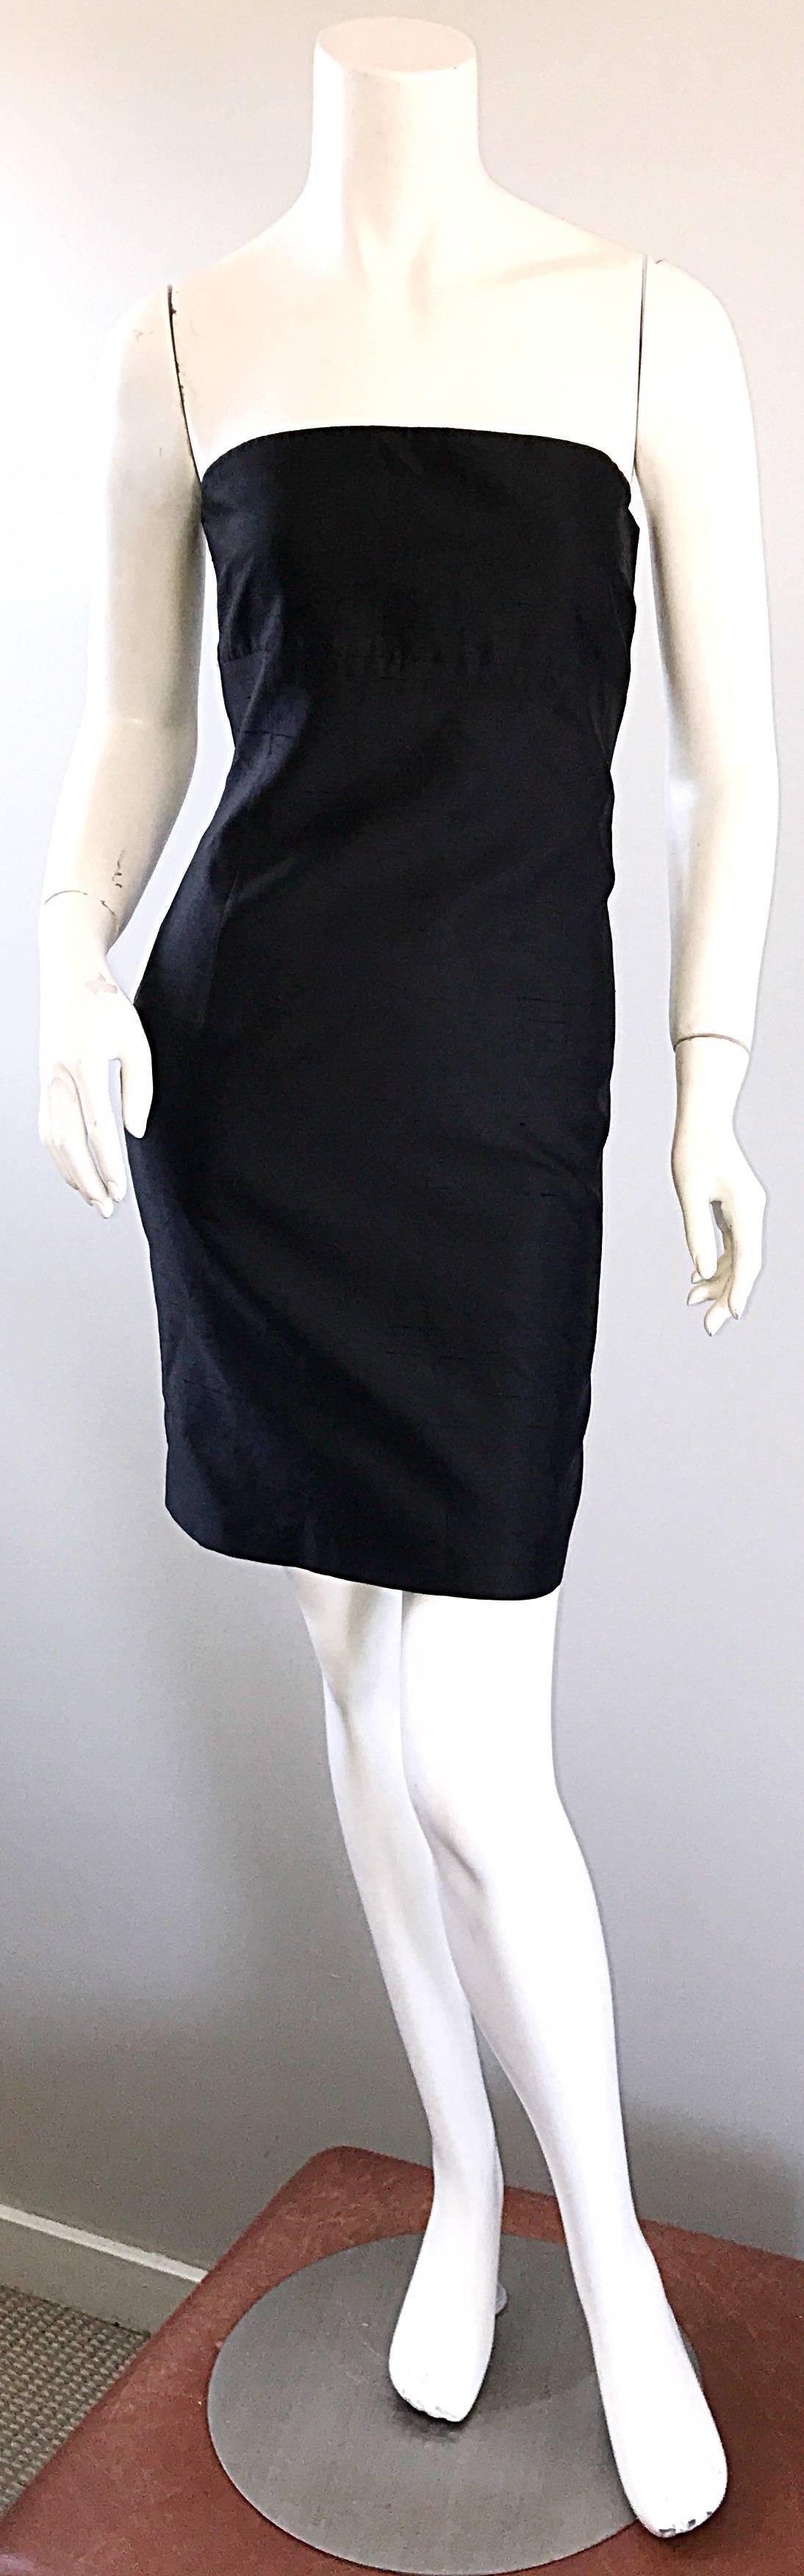 Sexy 90s MICHAEL KORS COLLECTION raw silk shantung strapless bodycon mini dress! Features a boned tailored bodice with a body hugging body. Super flattering fit with heavy attention to detail. Hidden zipper up the side and 
hook-and-eye closure.